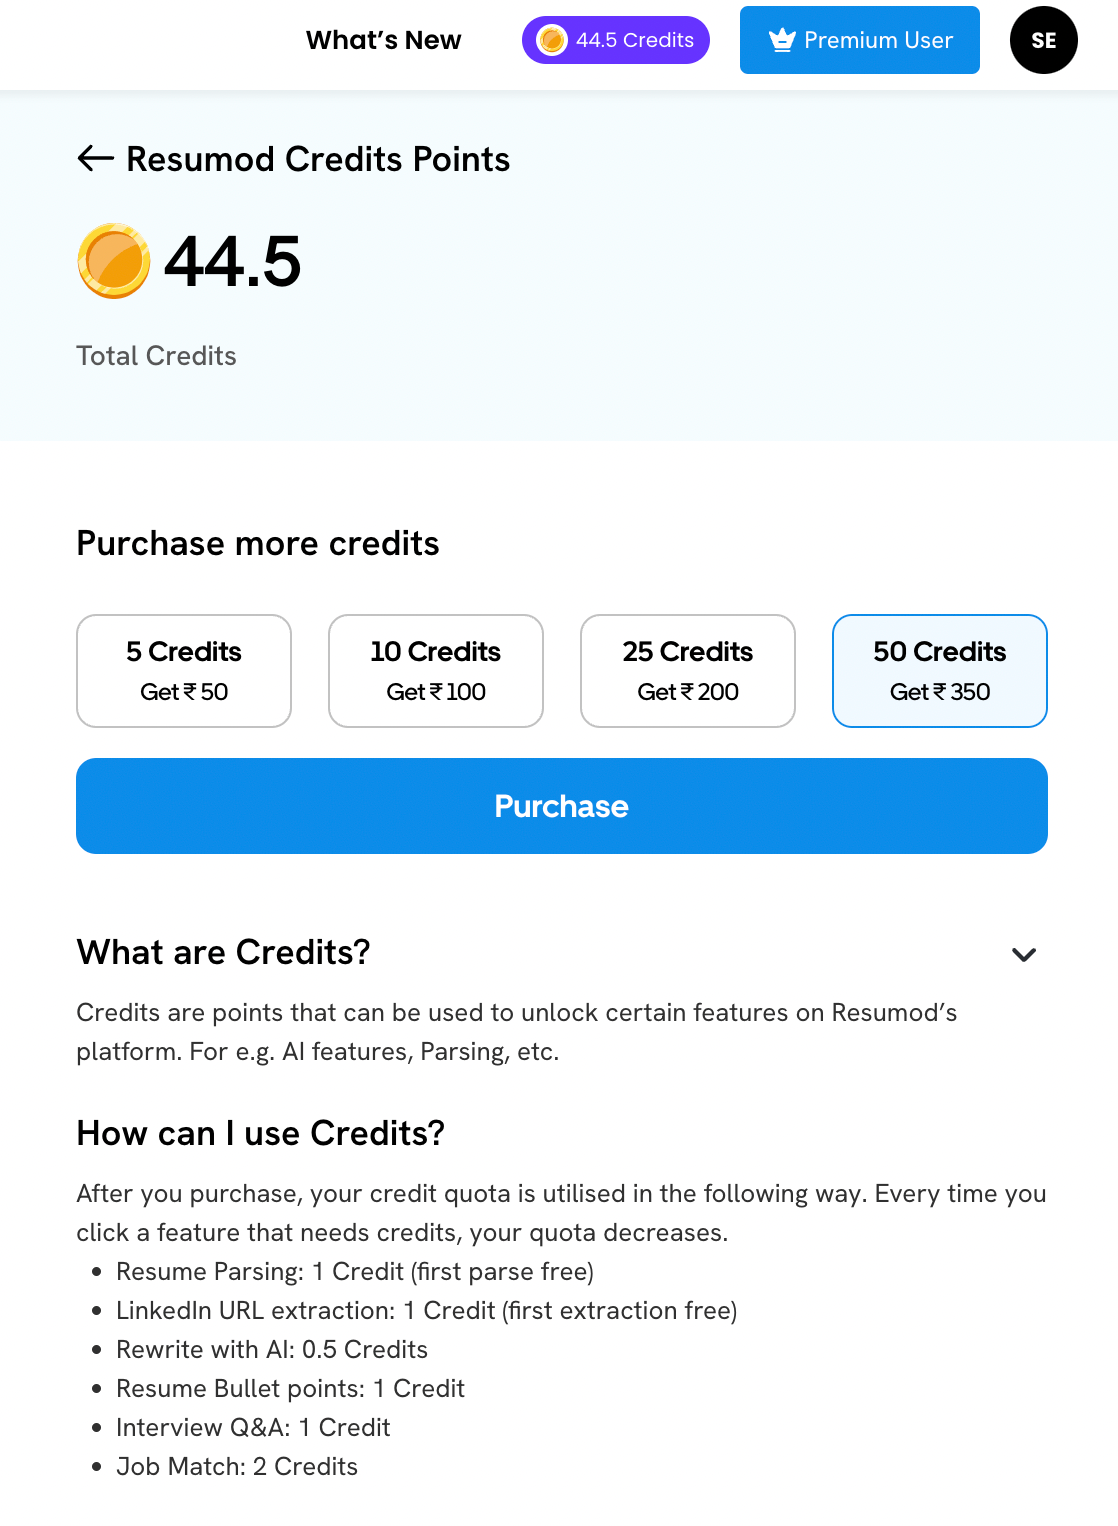 Resumod.co Credit System. Purchase coins and use them across the site for various features.